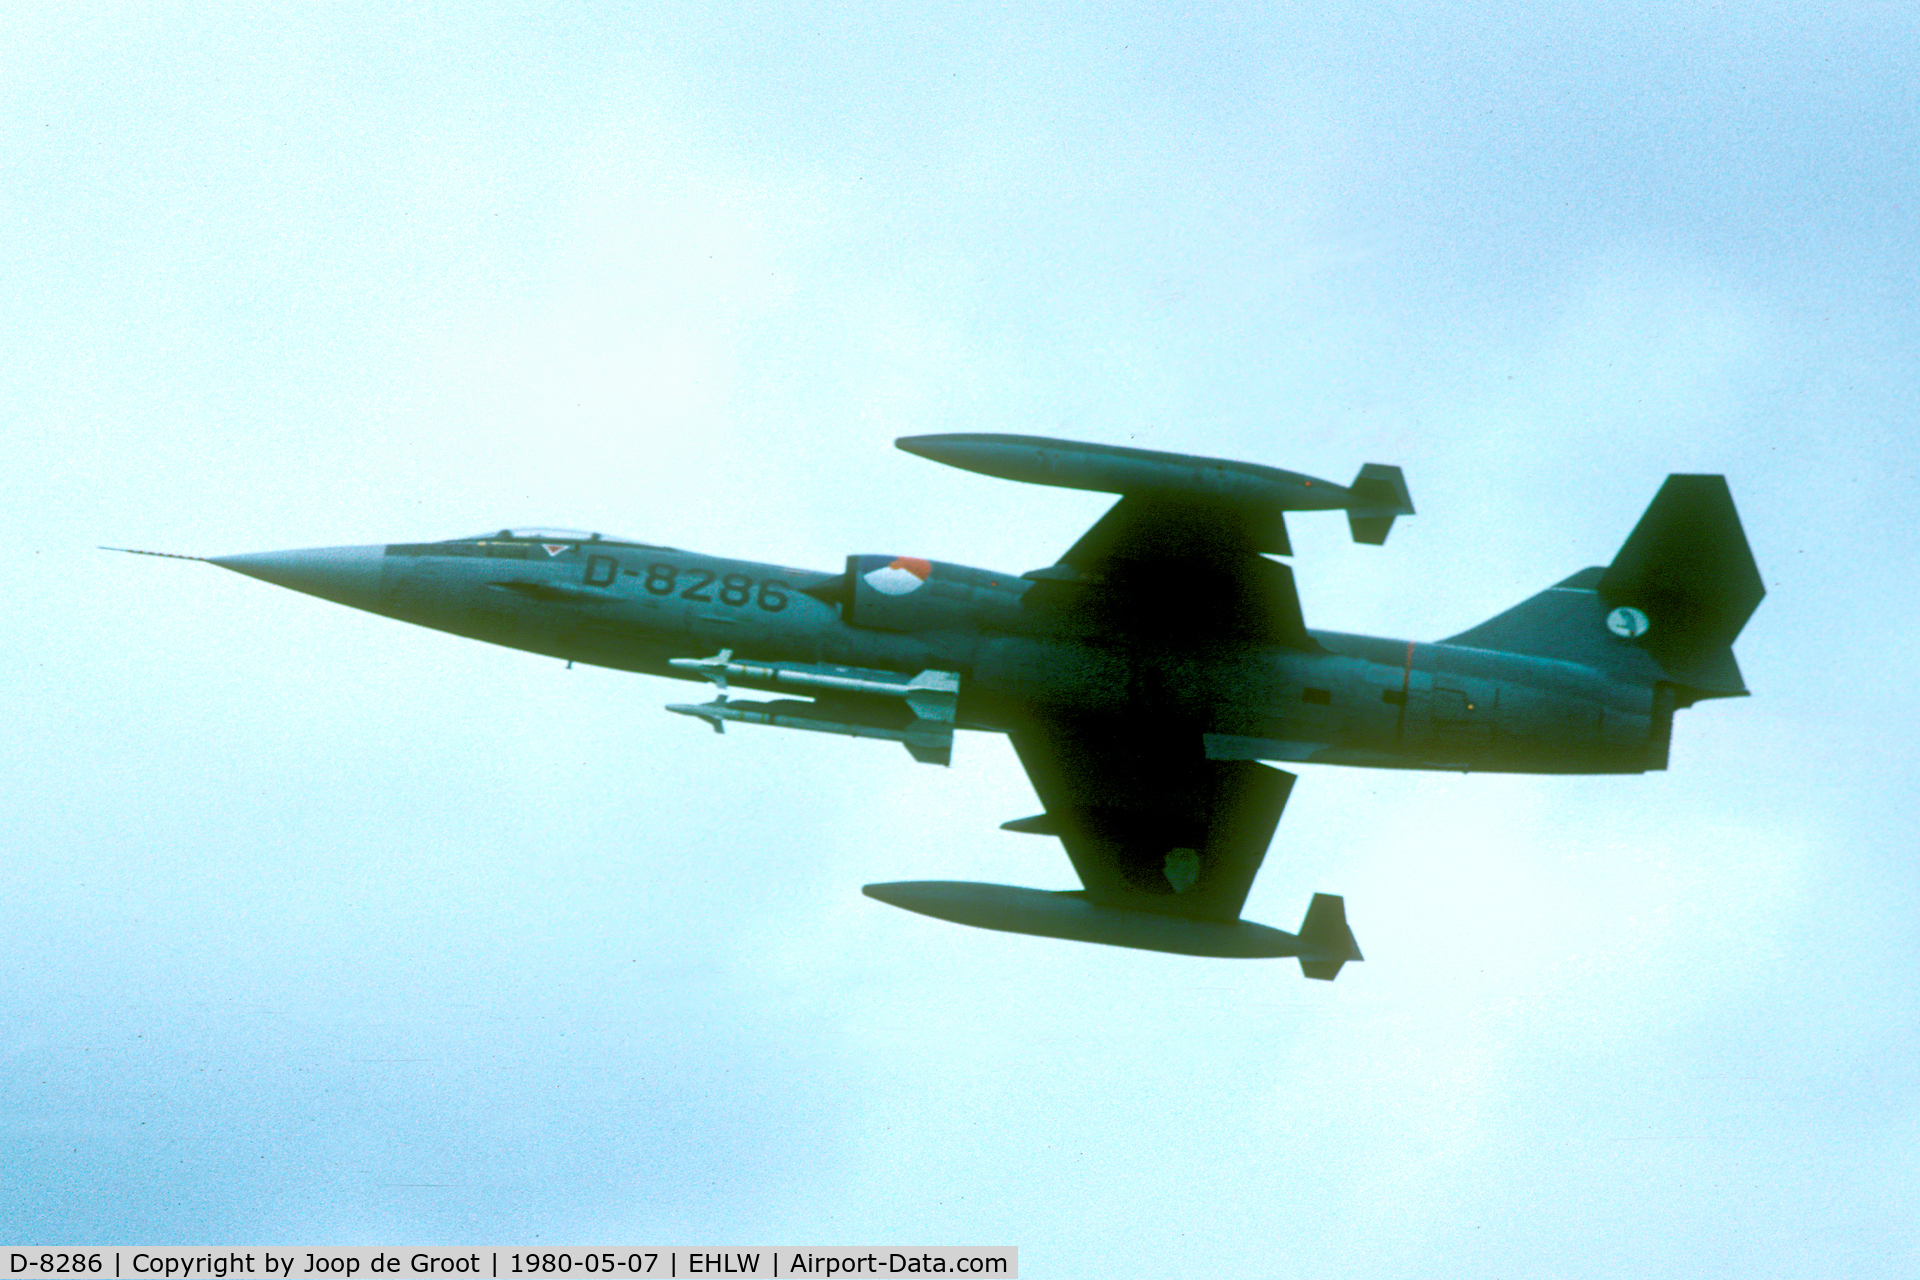 D-8286, Lockheed F-104G Starfighter C/N 683-8286, Take off by one of the Quick Reaction Alert aircraft. Scrambles like this took place on a very regular basis during the eighties.